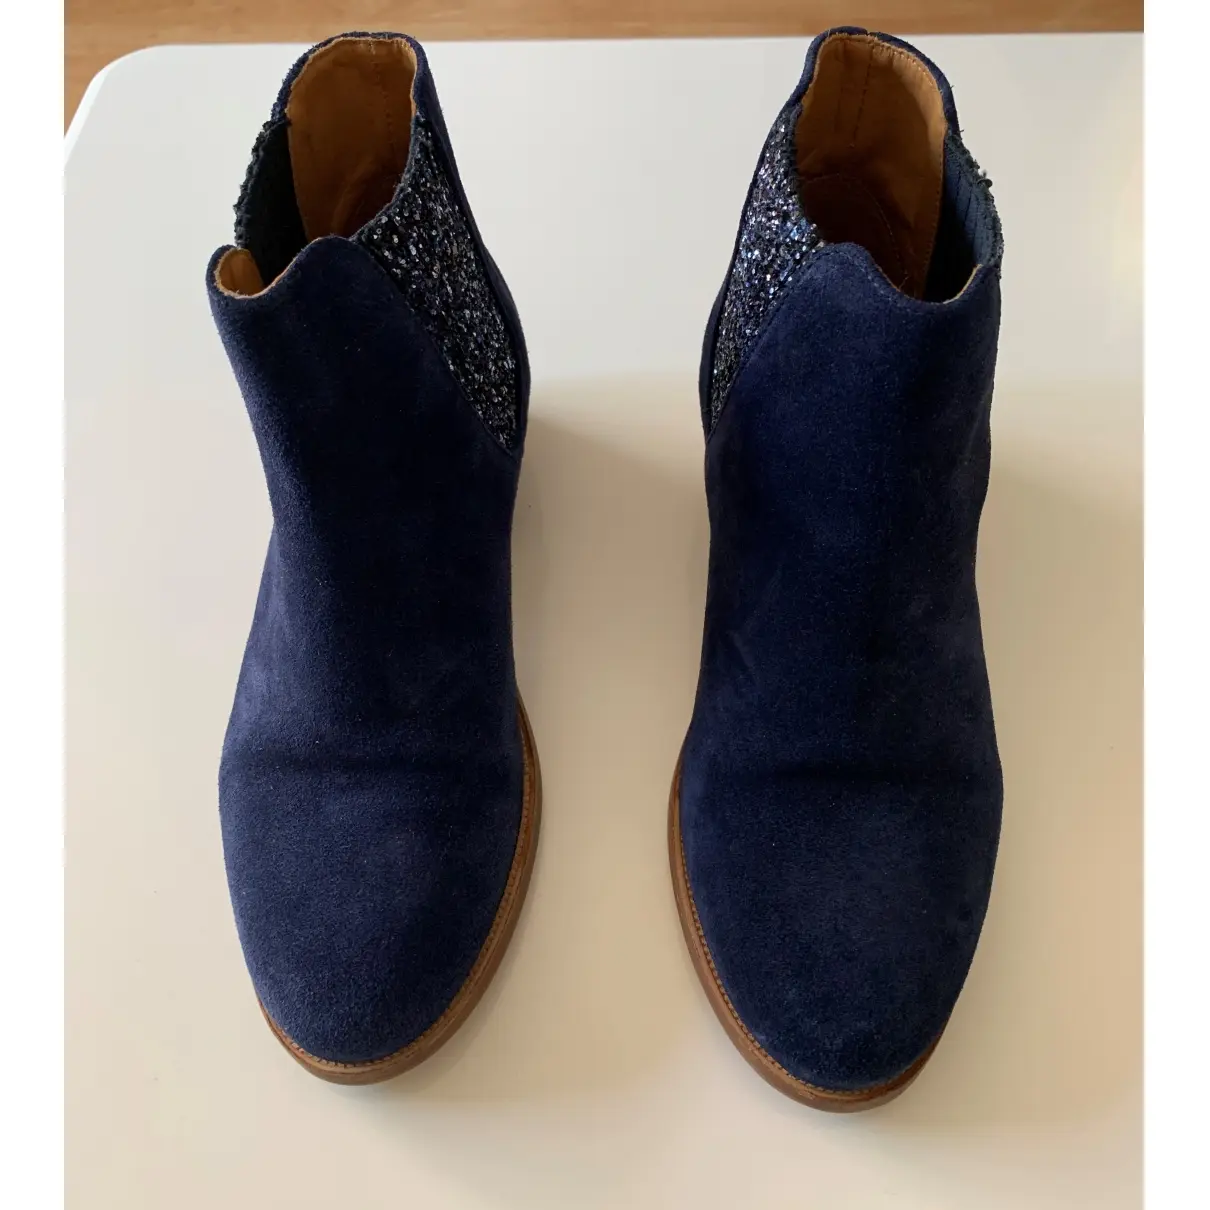 Buy Bobbies Ankle boots online